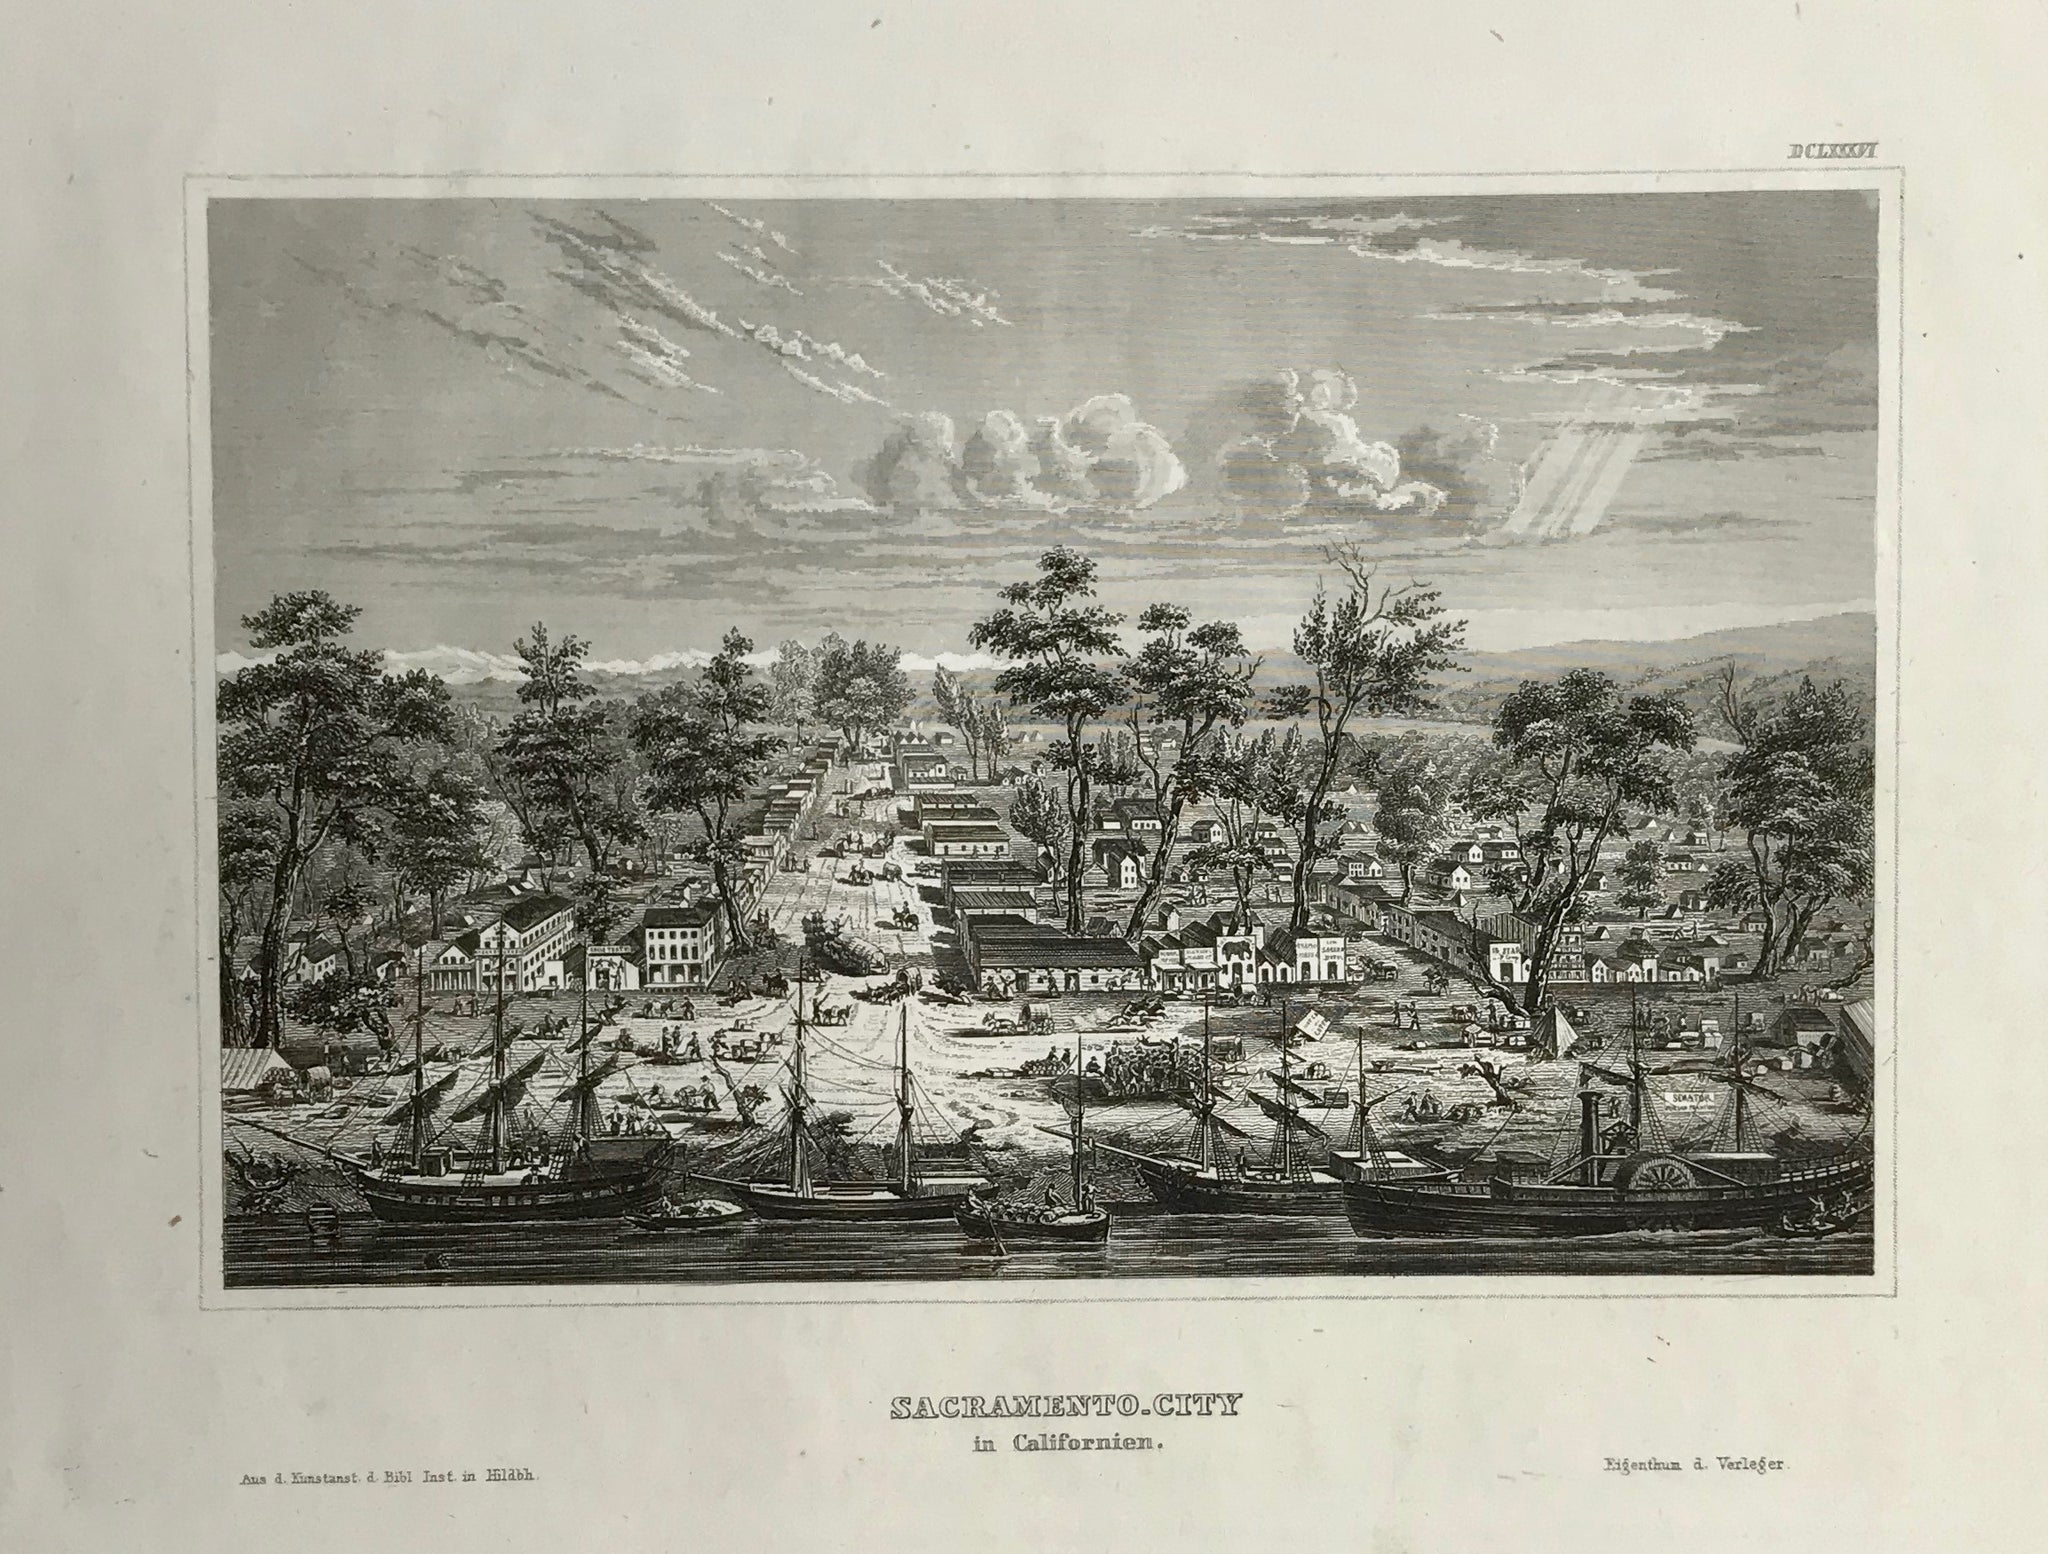 SACRAMENTO CITY.  Steel engraving from the Bibliograph. Institut in Hildburghausen ca 1845.